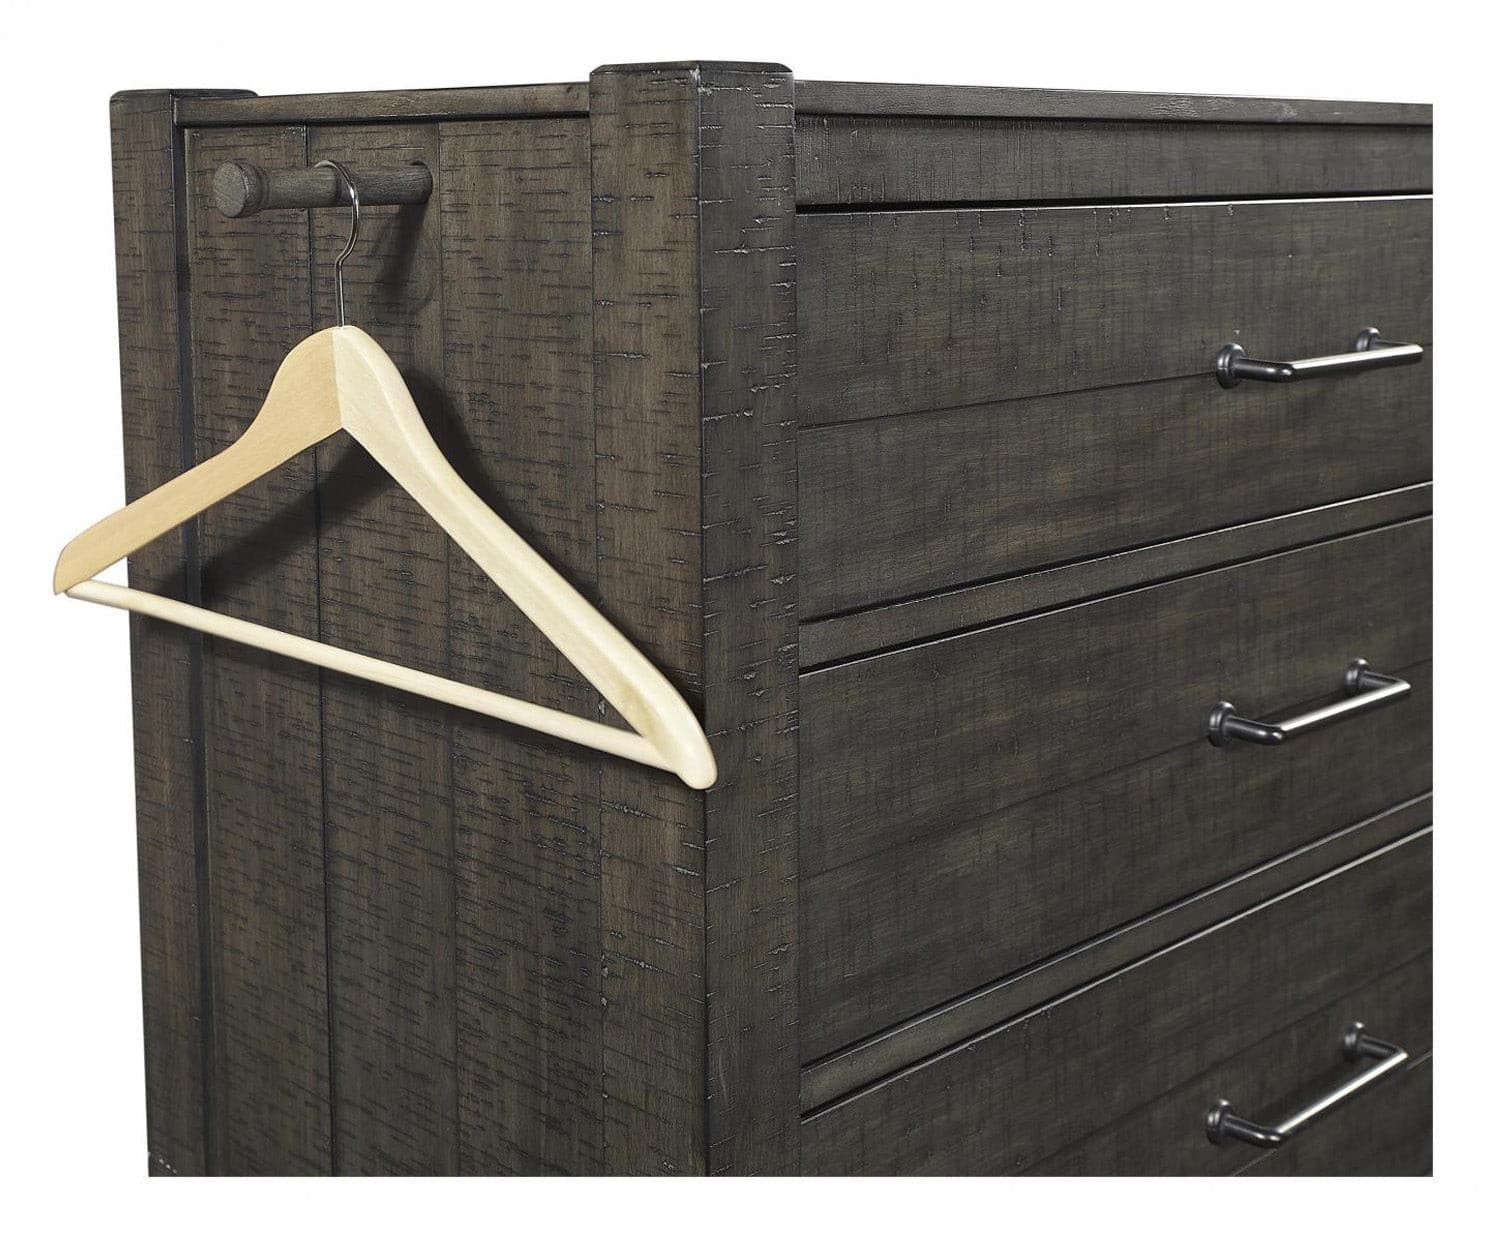 Mill Creek Collection Carob Chest.